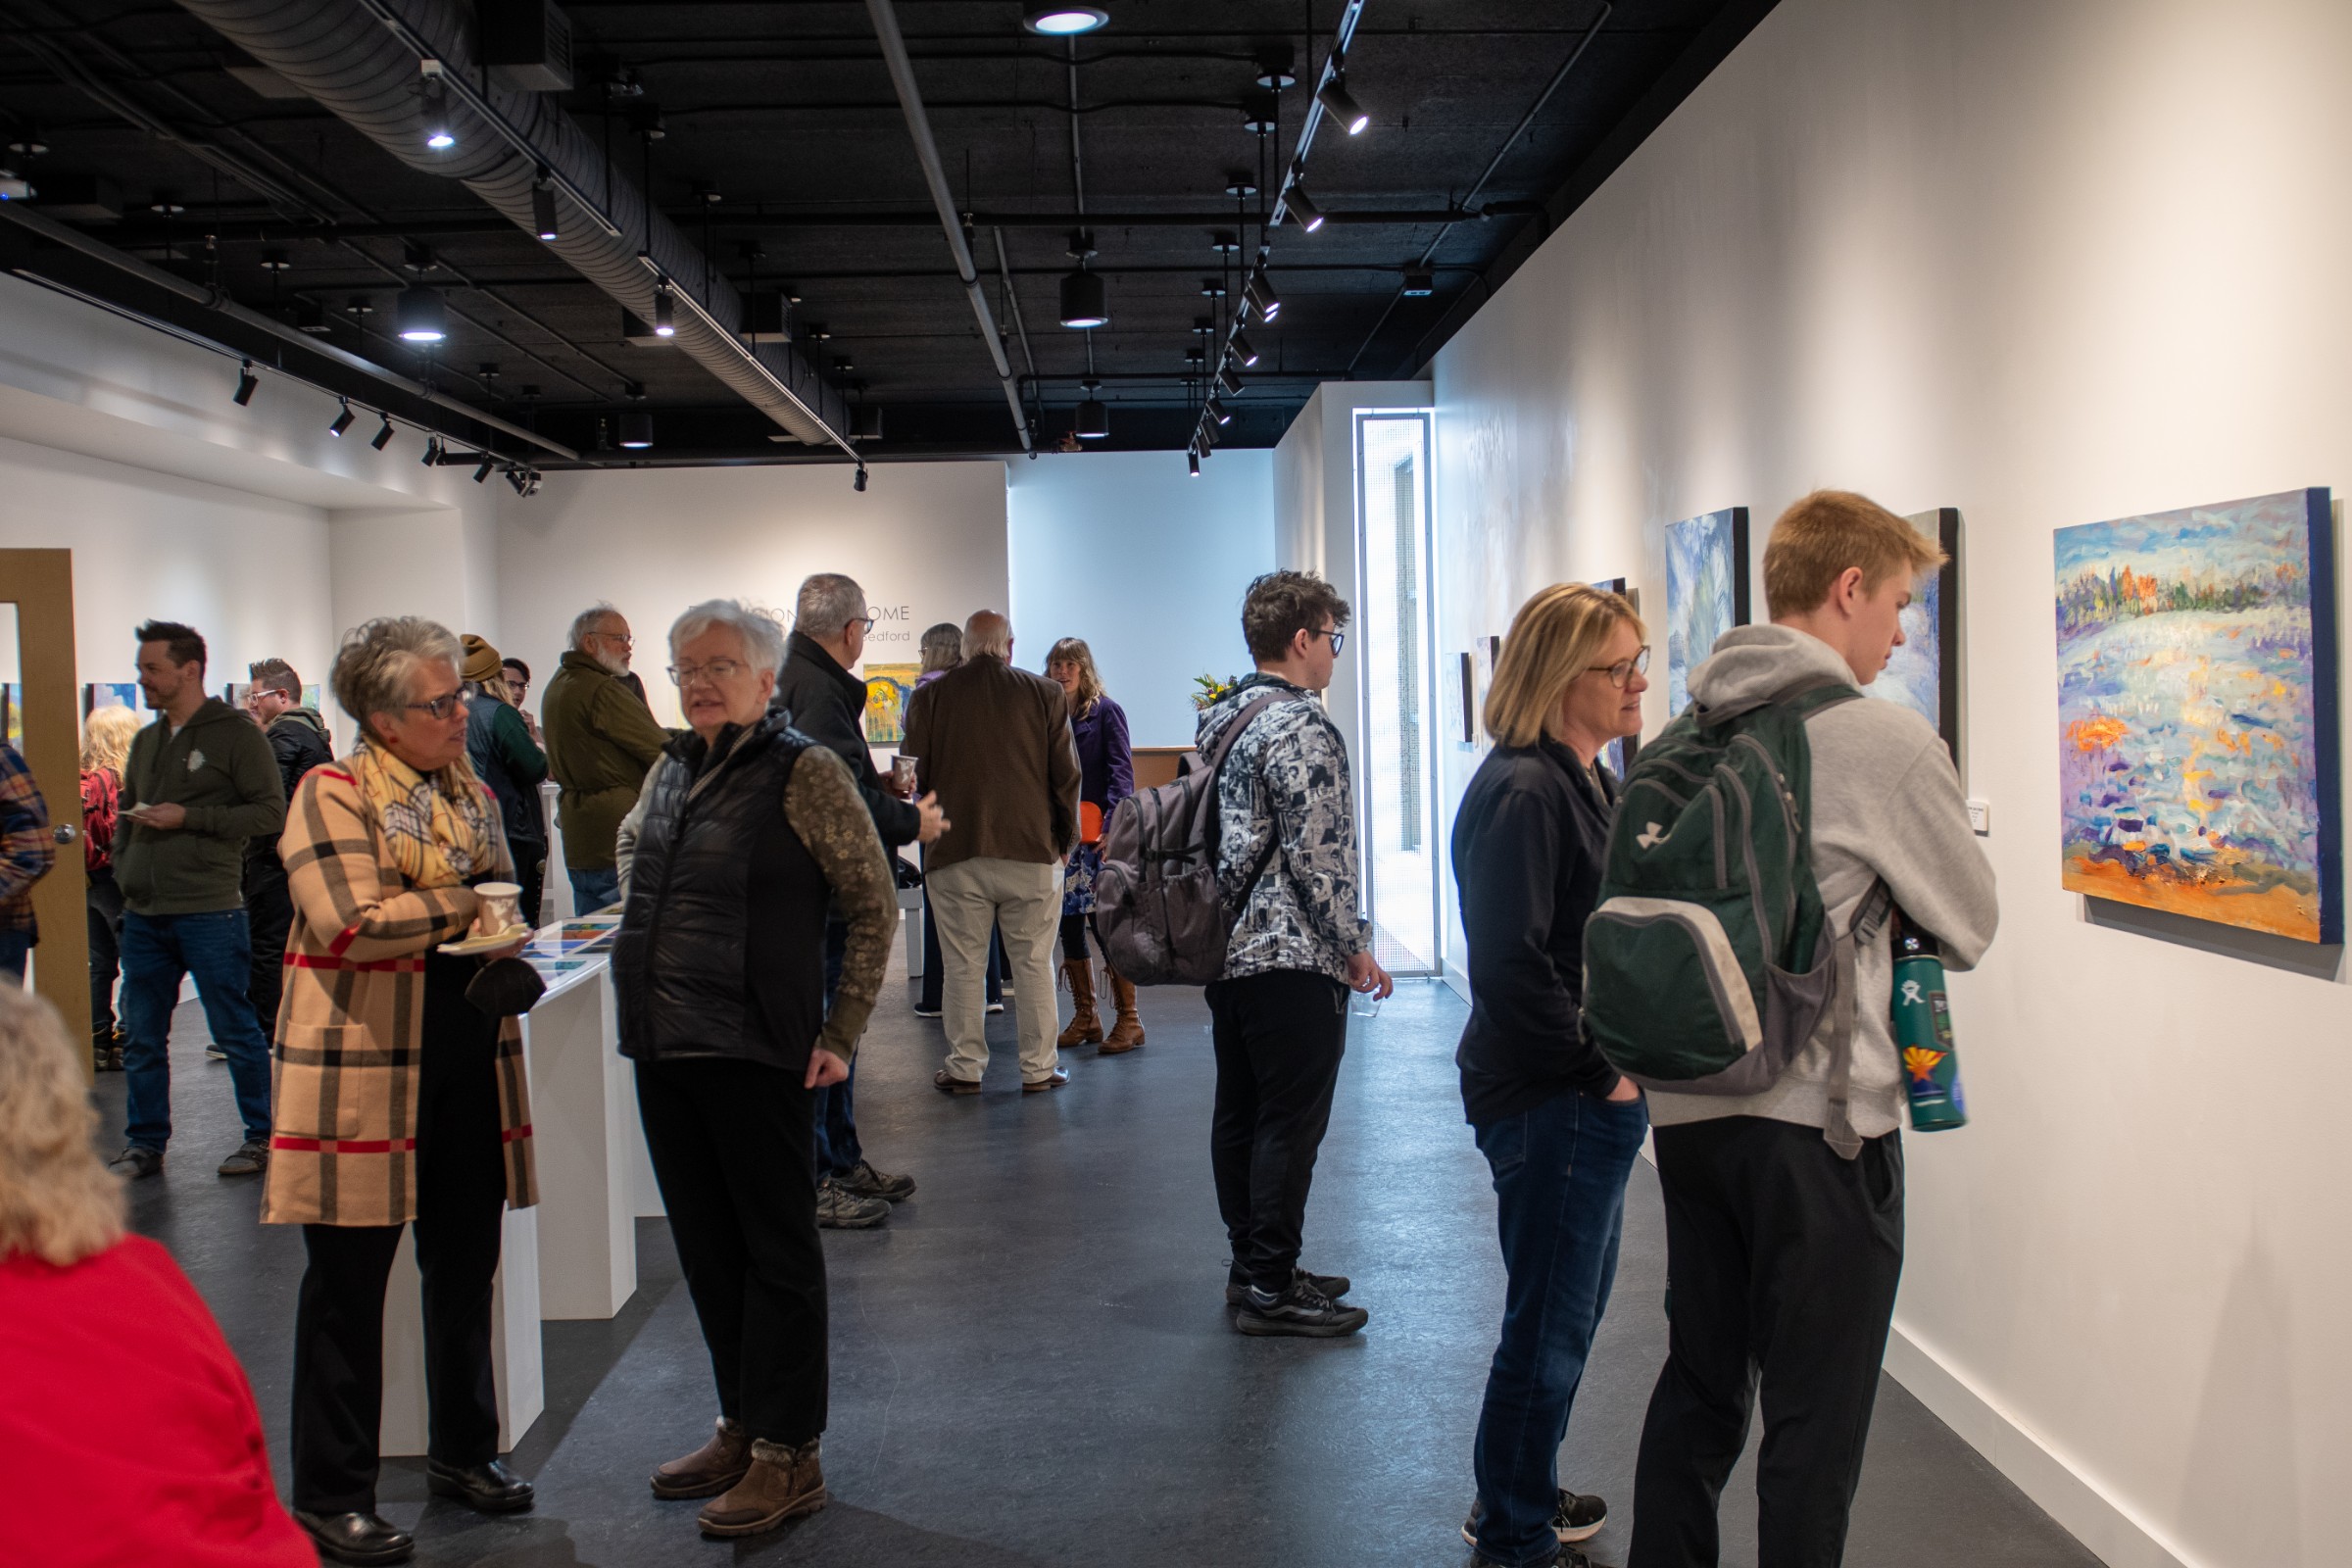 Attendees of the Talley Gallery opening reception on April 4